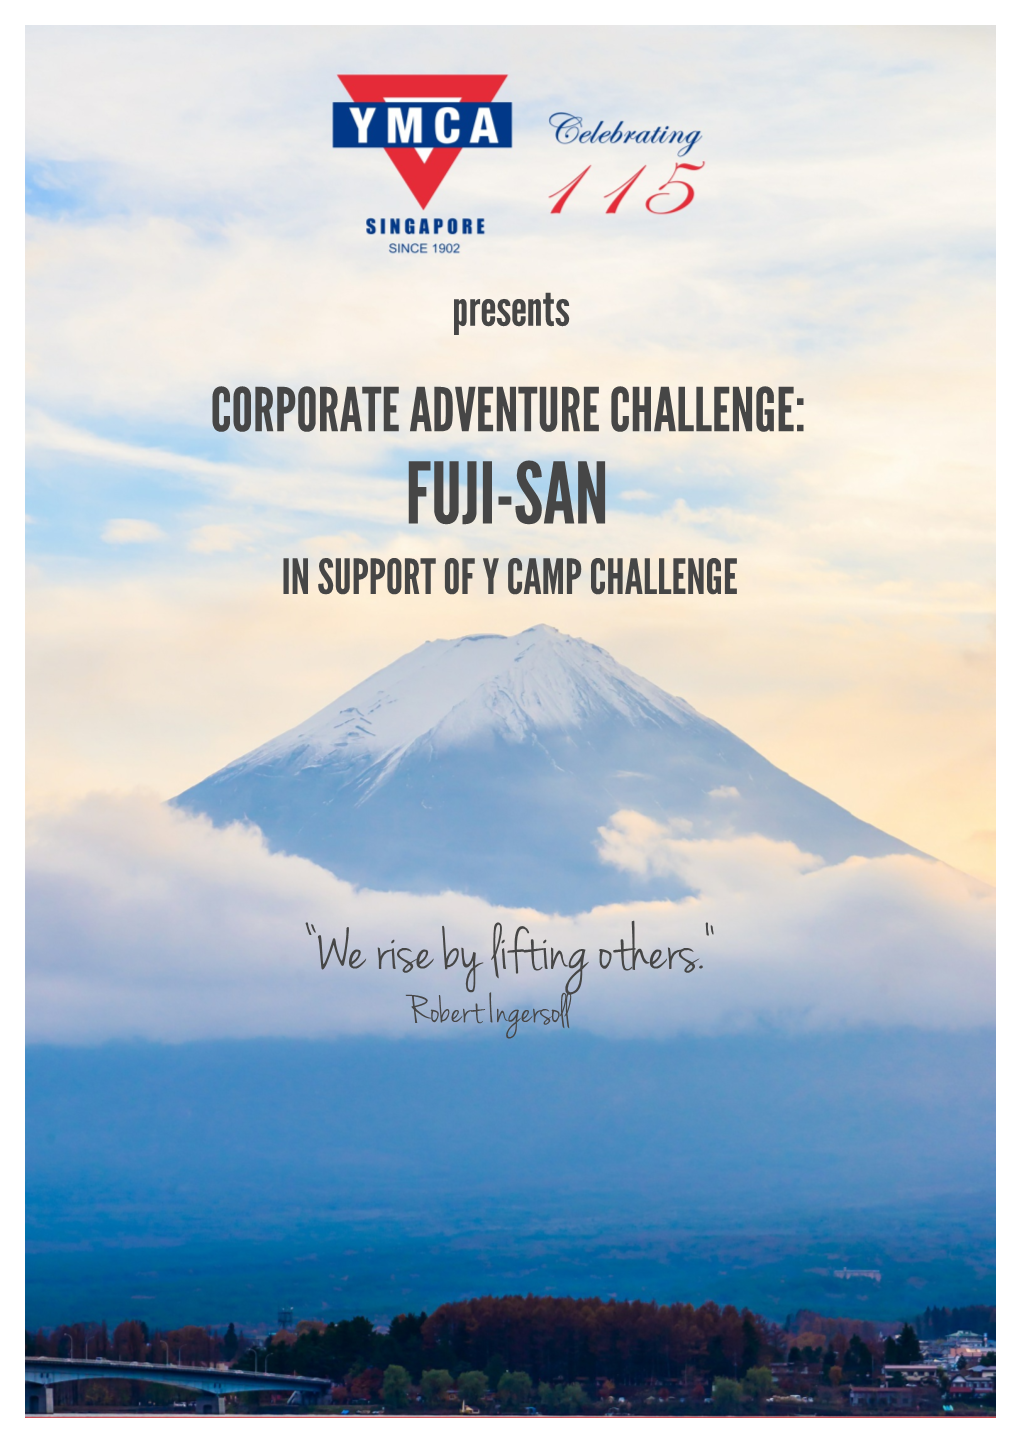 Fuji-San in Support of Y Camp Challenge